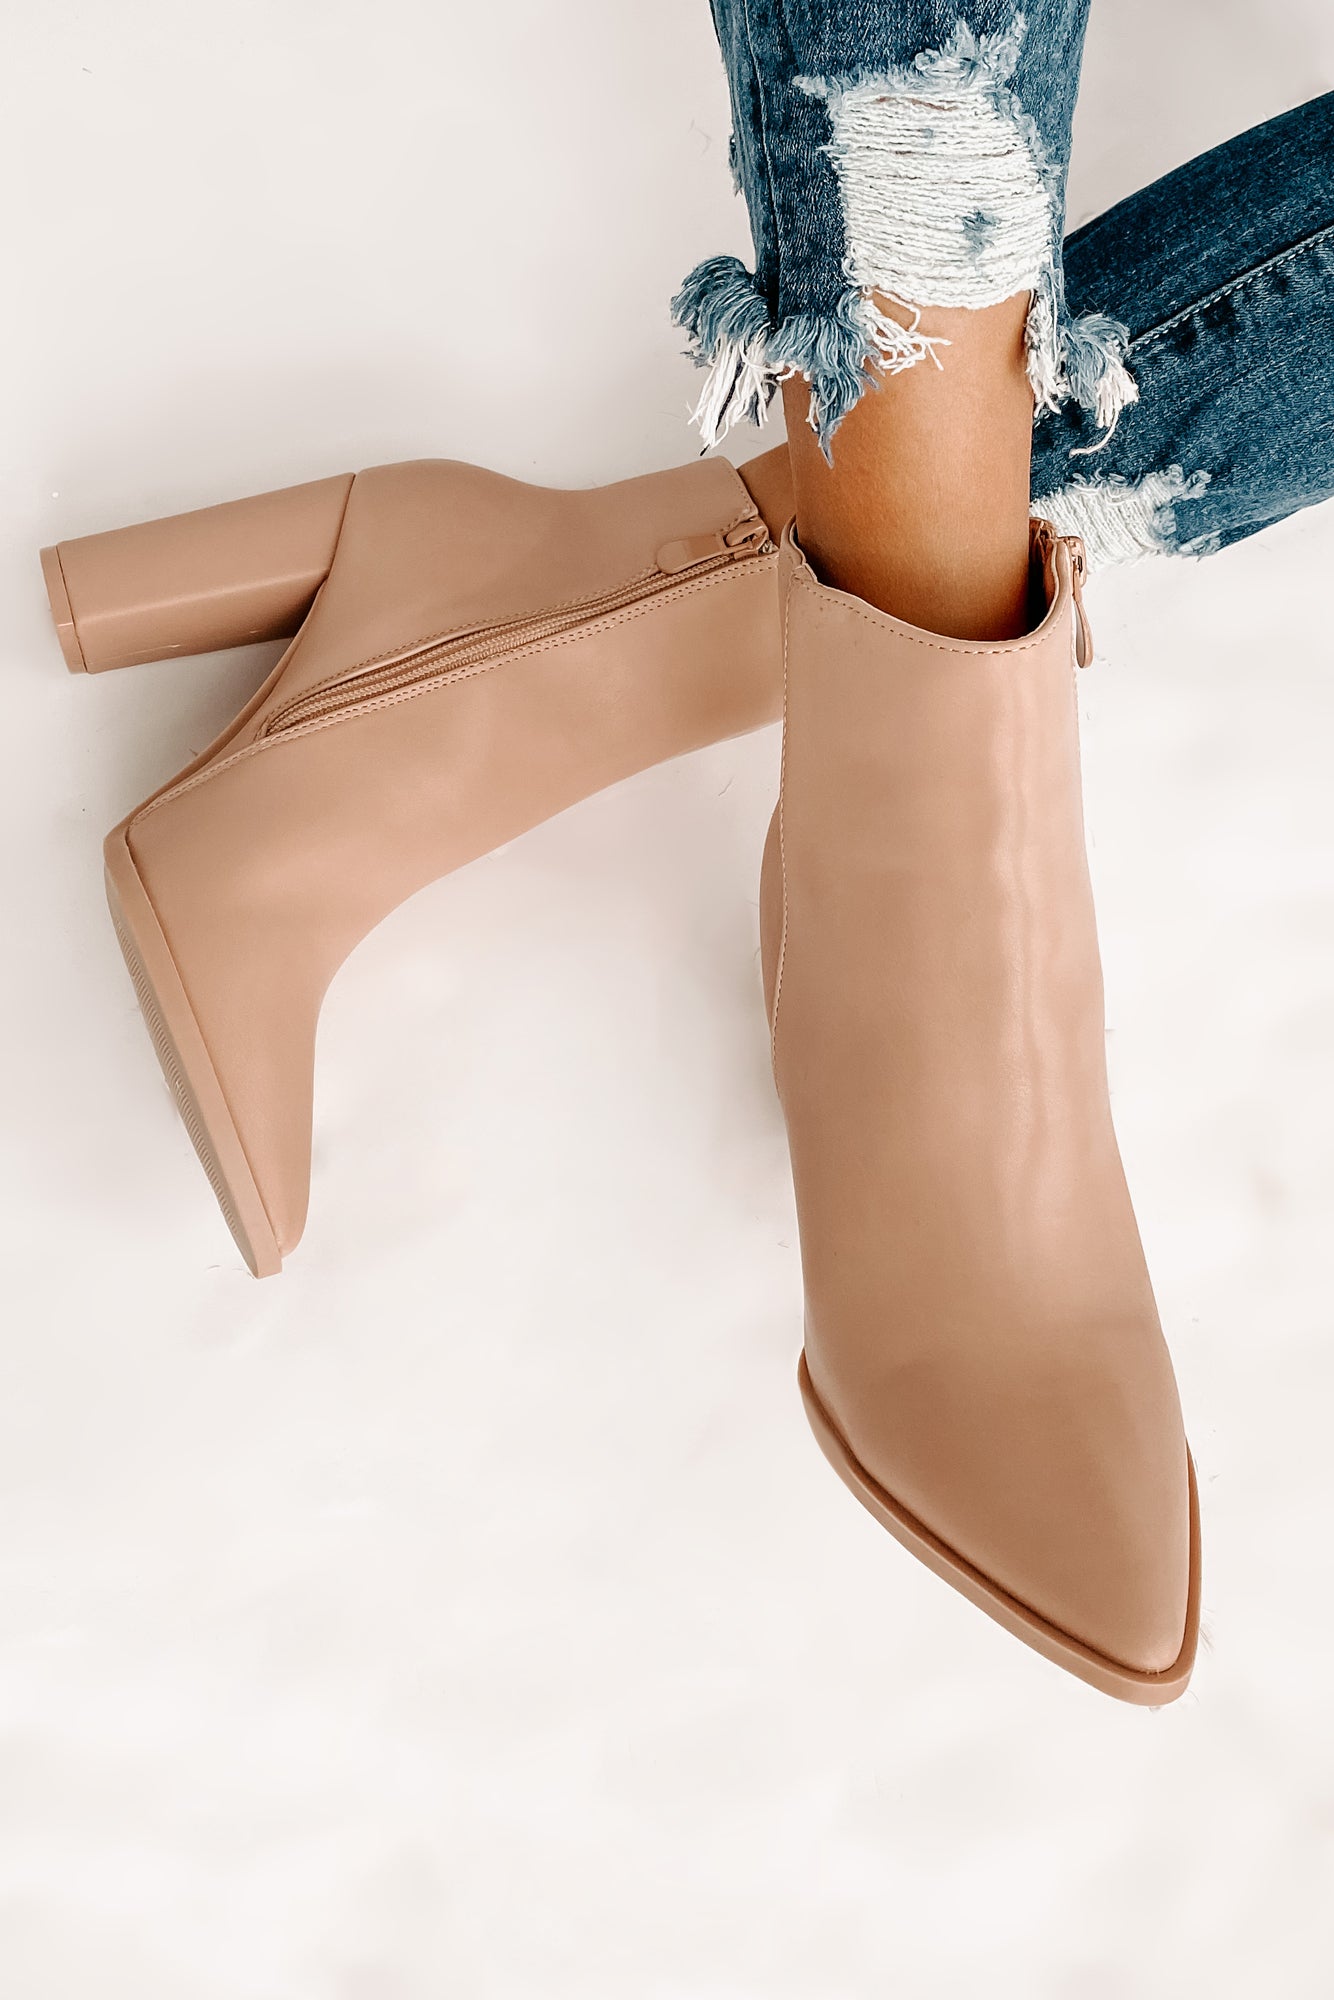 Obsession Game Pointed Toe Bootie (Taupe) - NanaMacs